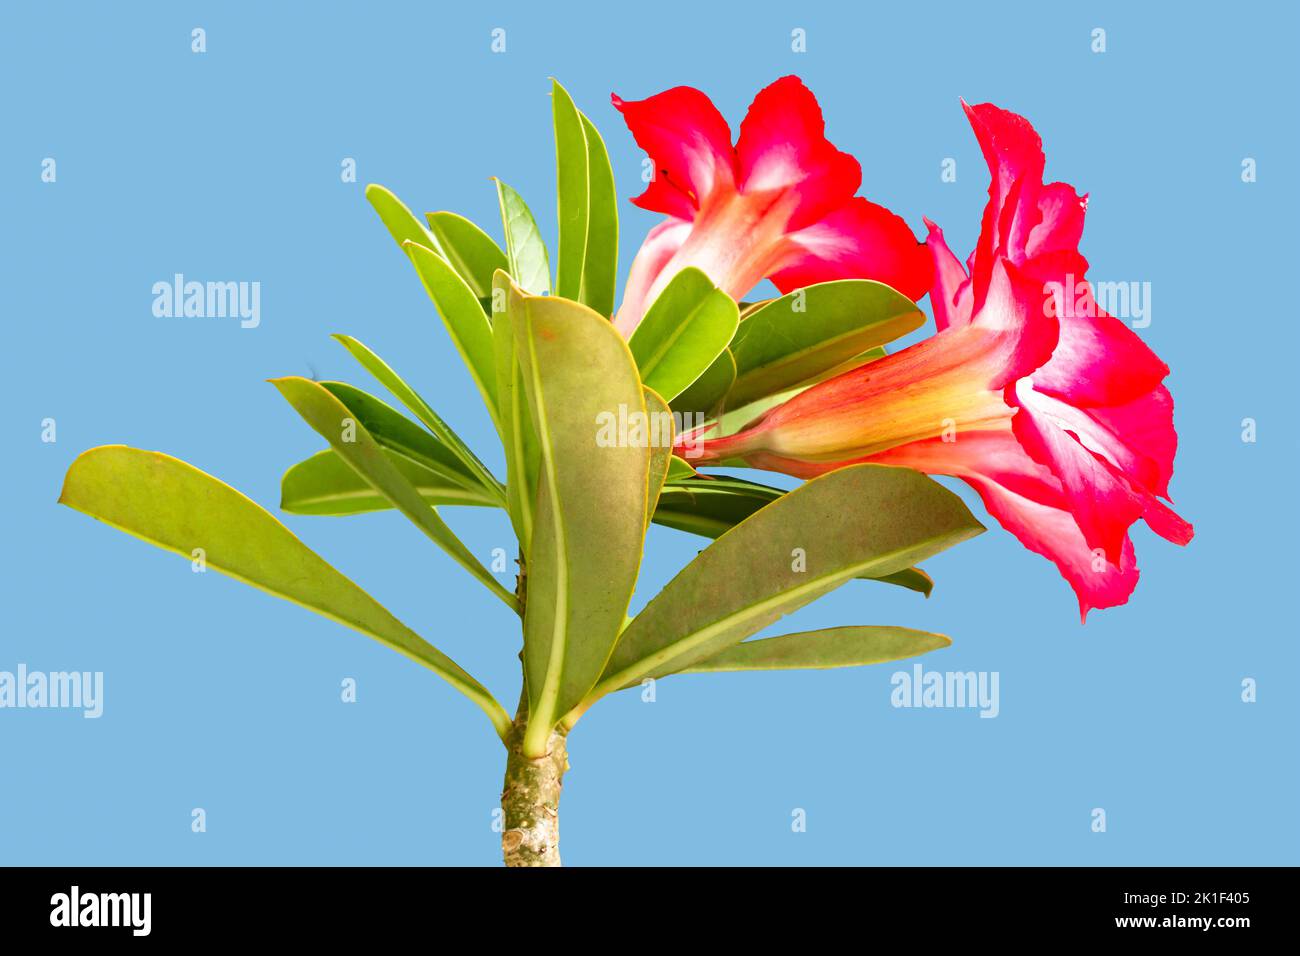 Adenium flower stalks that are blooming are red and pink with fresh green leaves, isolated on a blue background Stock Photo